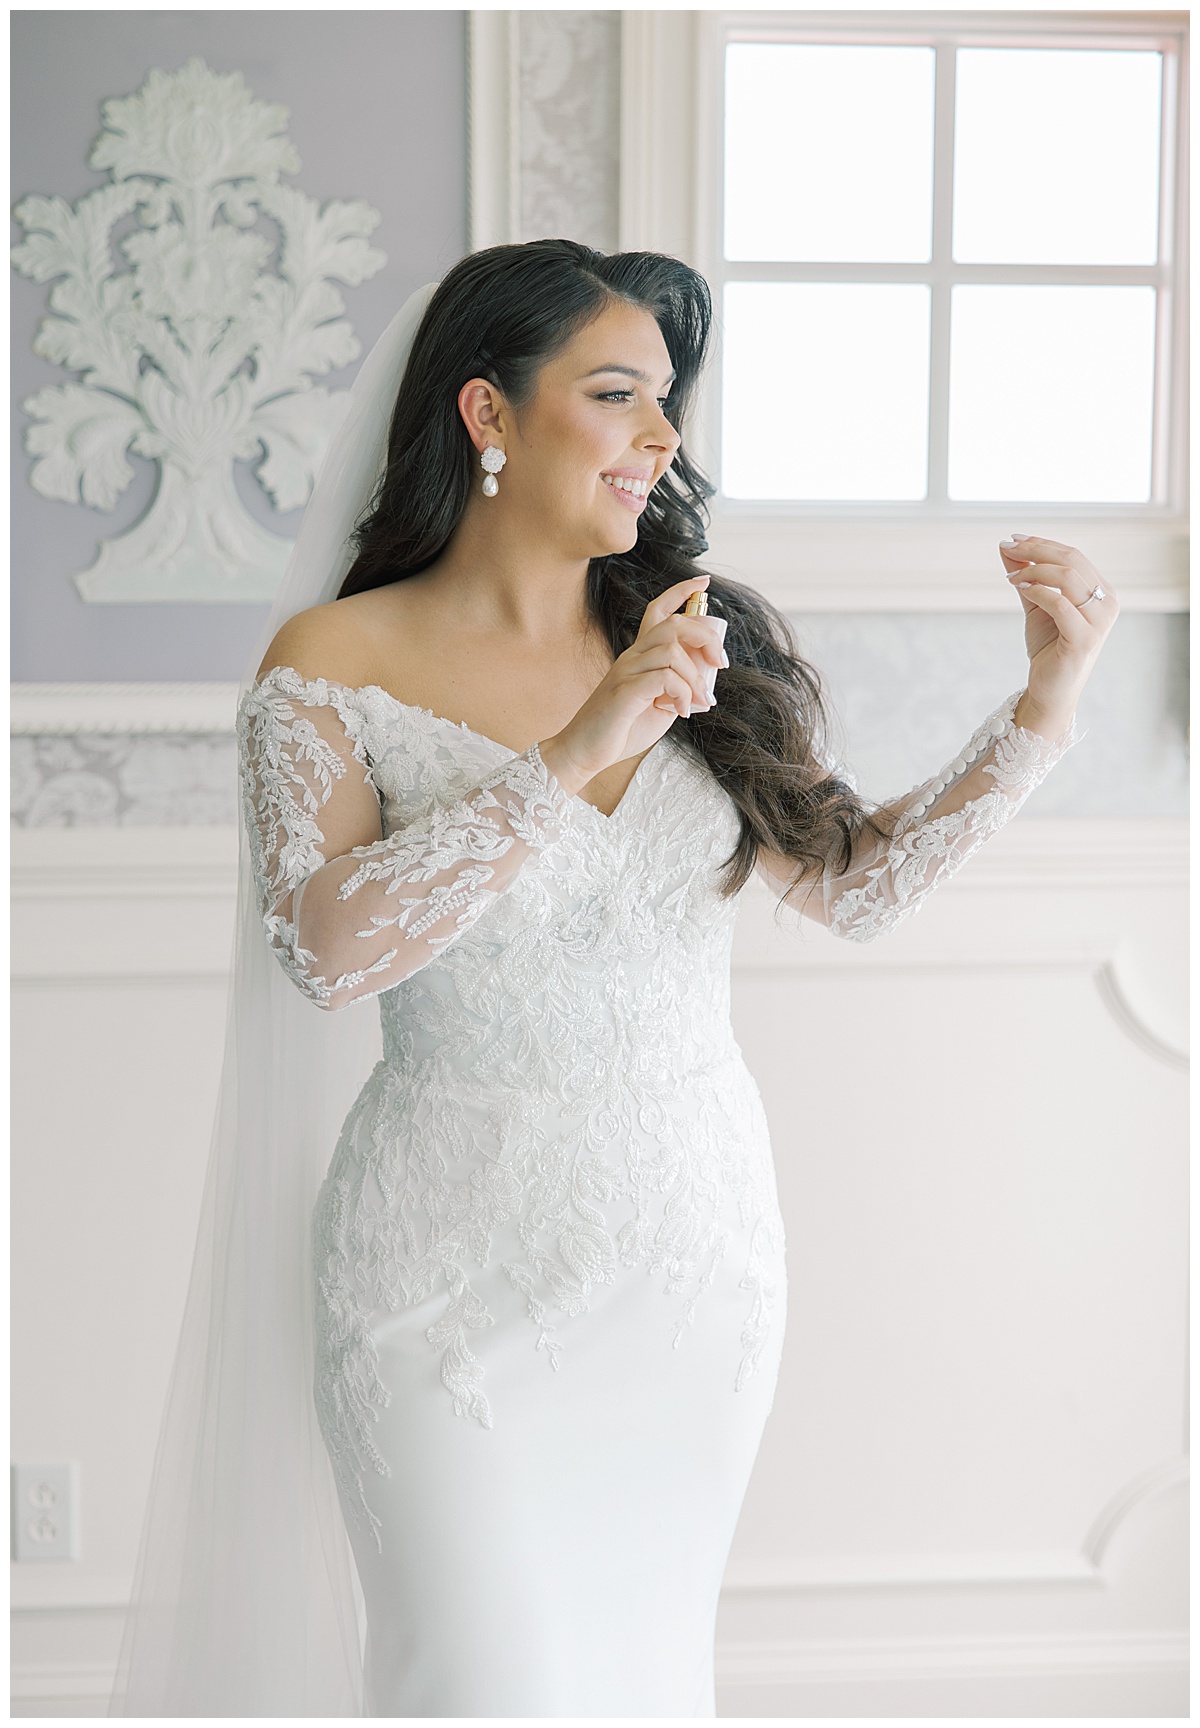 Bride spraying perfume on wedding day with lace sleeved dress. 